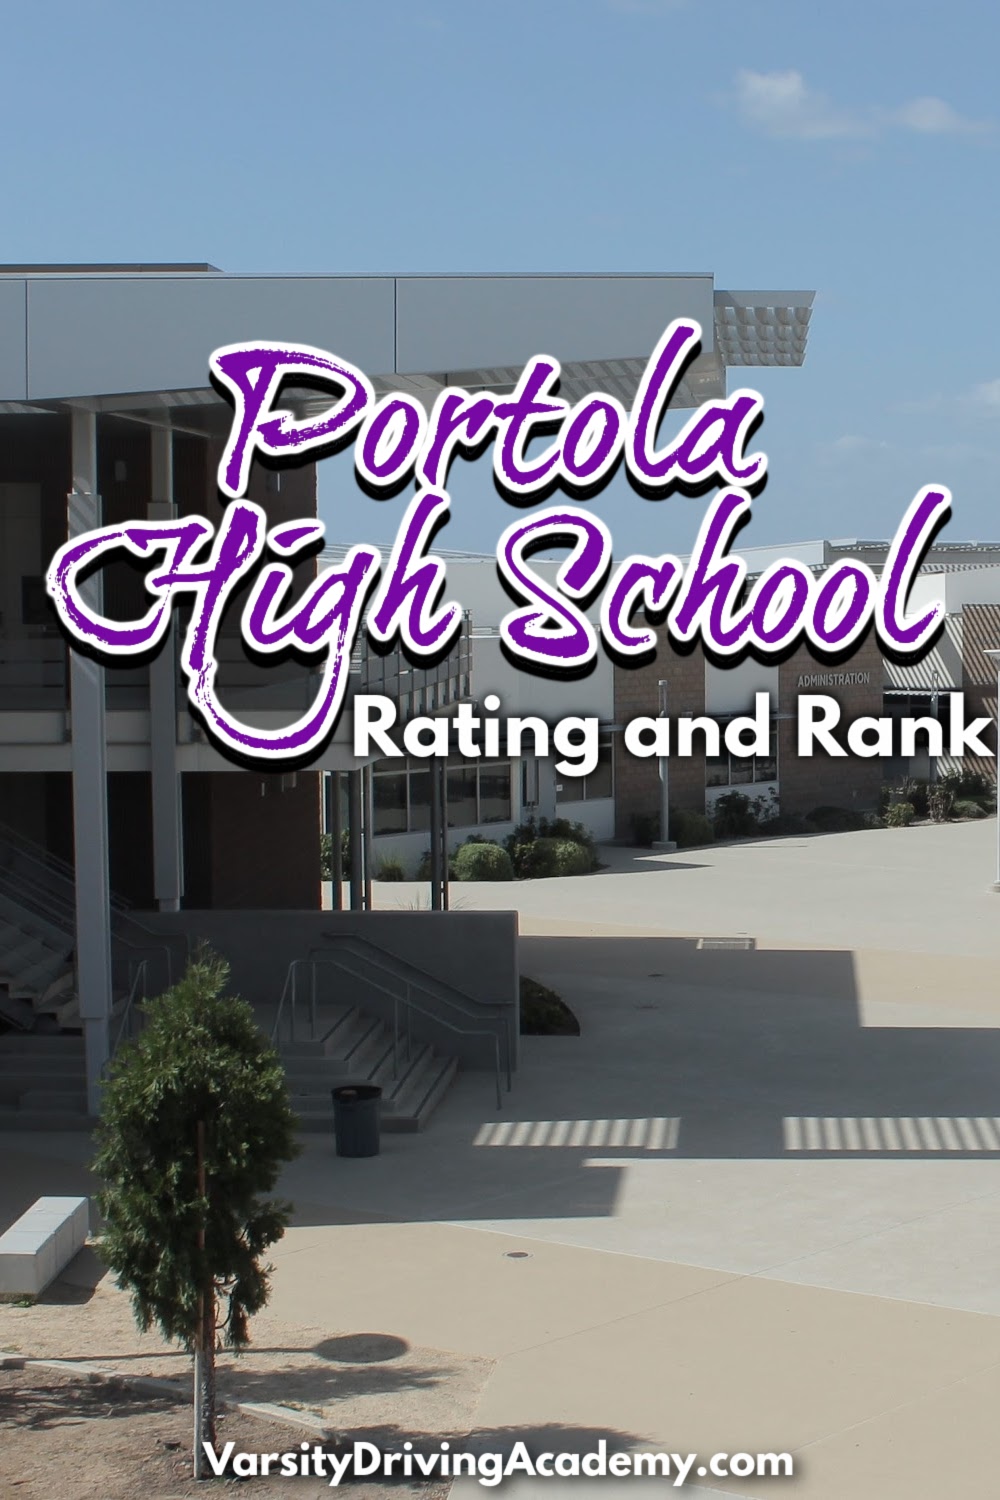 Irvine is known for its safety and family-oriented community and now, the Portola High School is one school that helps teach the community.